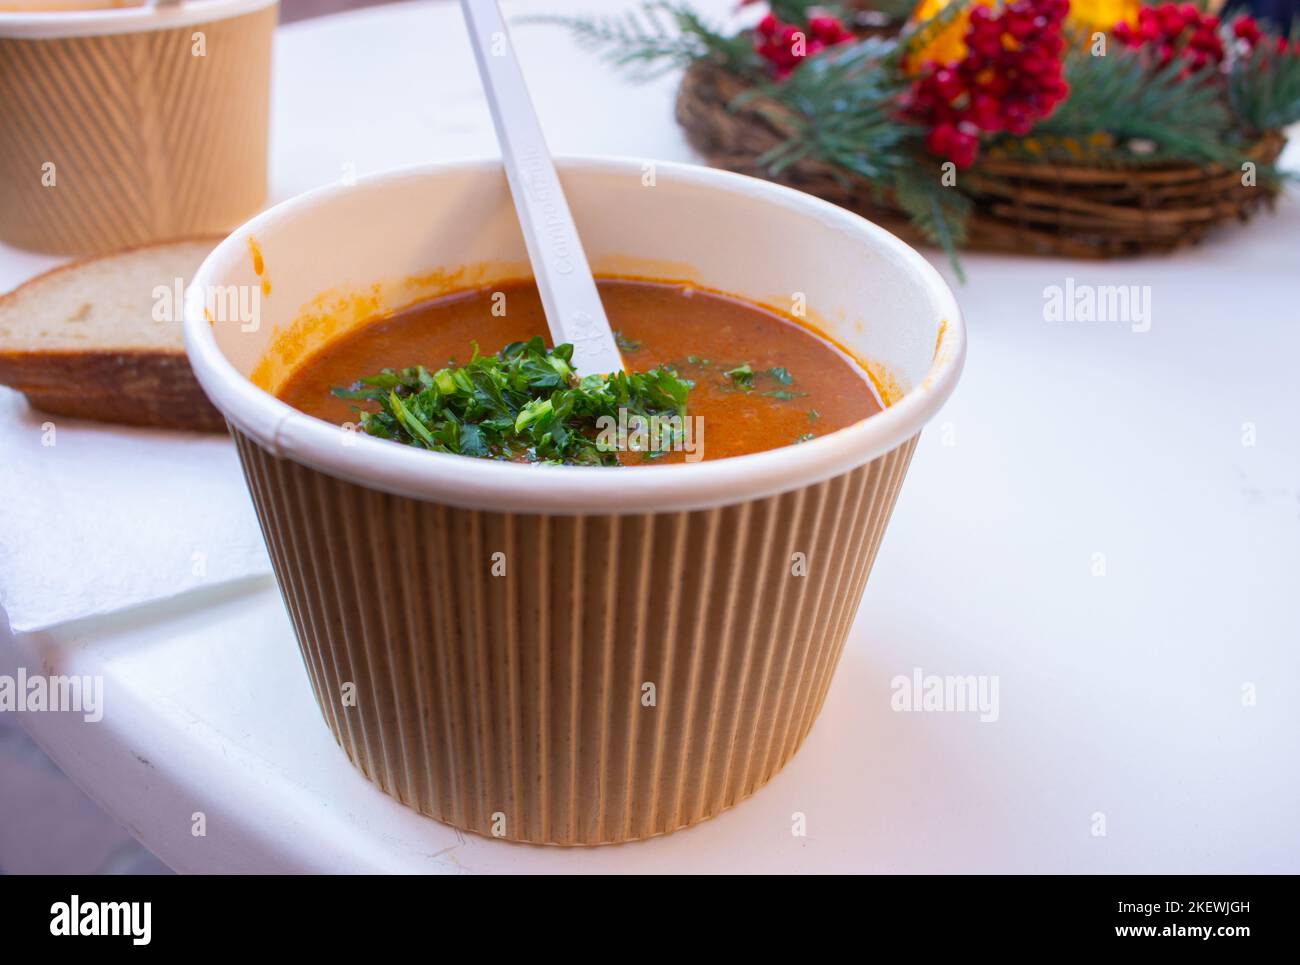 Goulash soup with spoon in paper bowl. Street food concept. Spicy meat soup. Street lifestyle. Travel cuisine. Tasty dinner. Delicious meal. Stock Photo